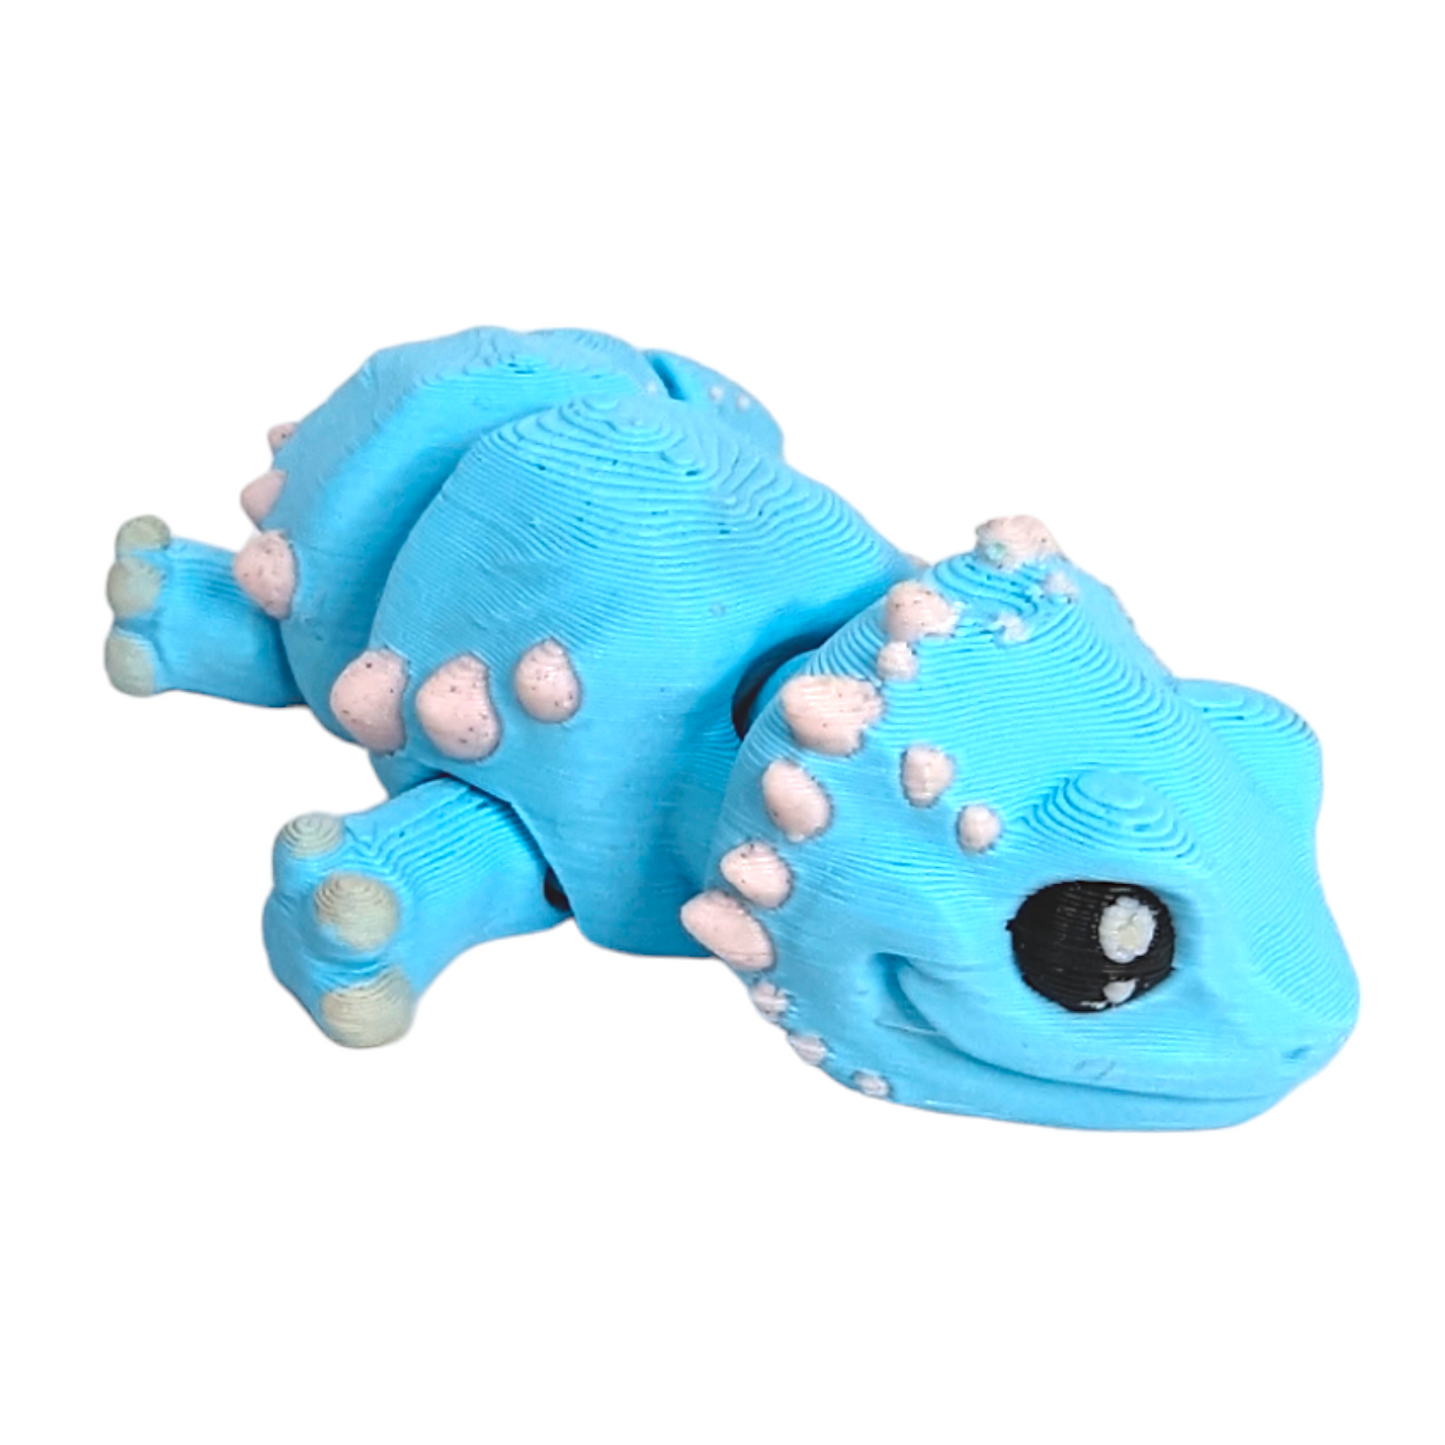 MMMini Bearded Dragon Fidget - 9 points articulation - MatMires Makes